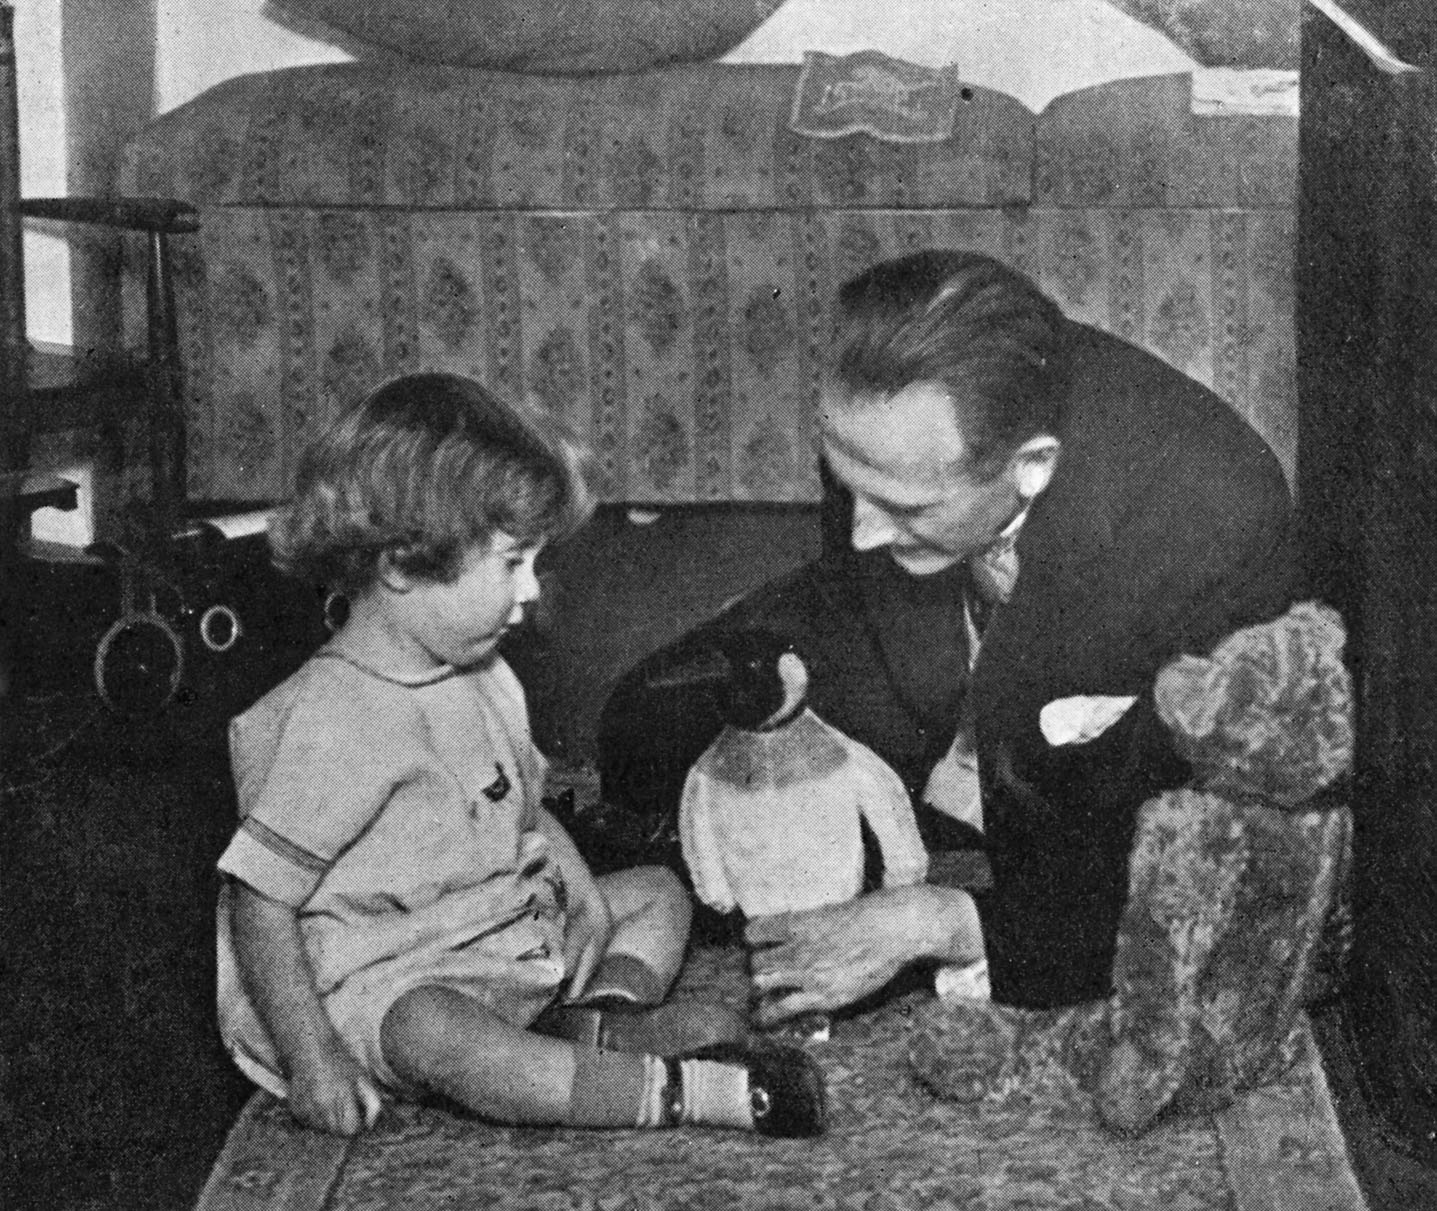 A. A. Milne and Christopher Robin Milne playing with a toy teddy bear. (Culture Club—Getty Images)